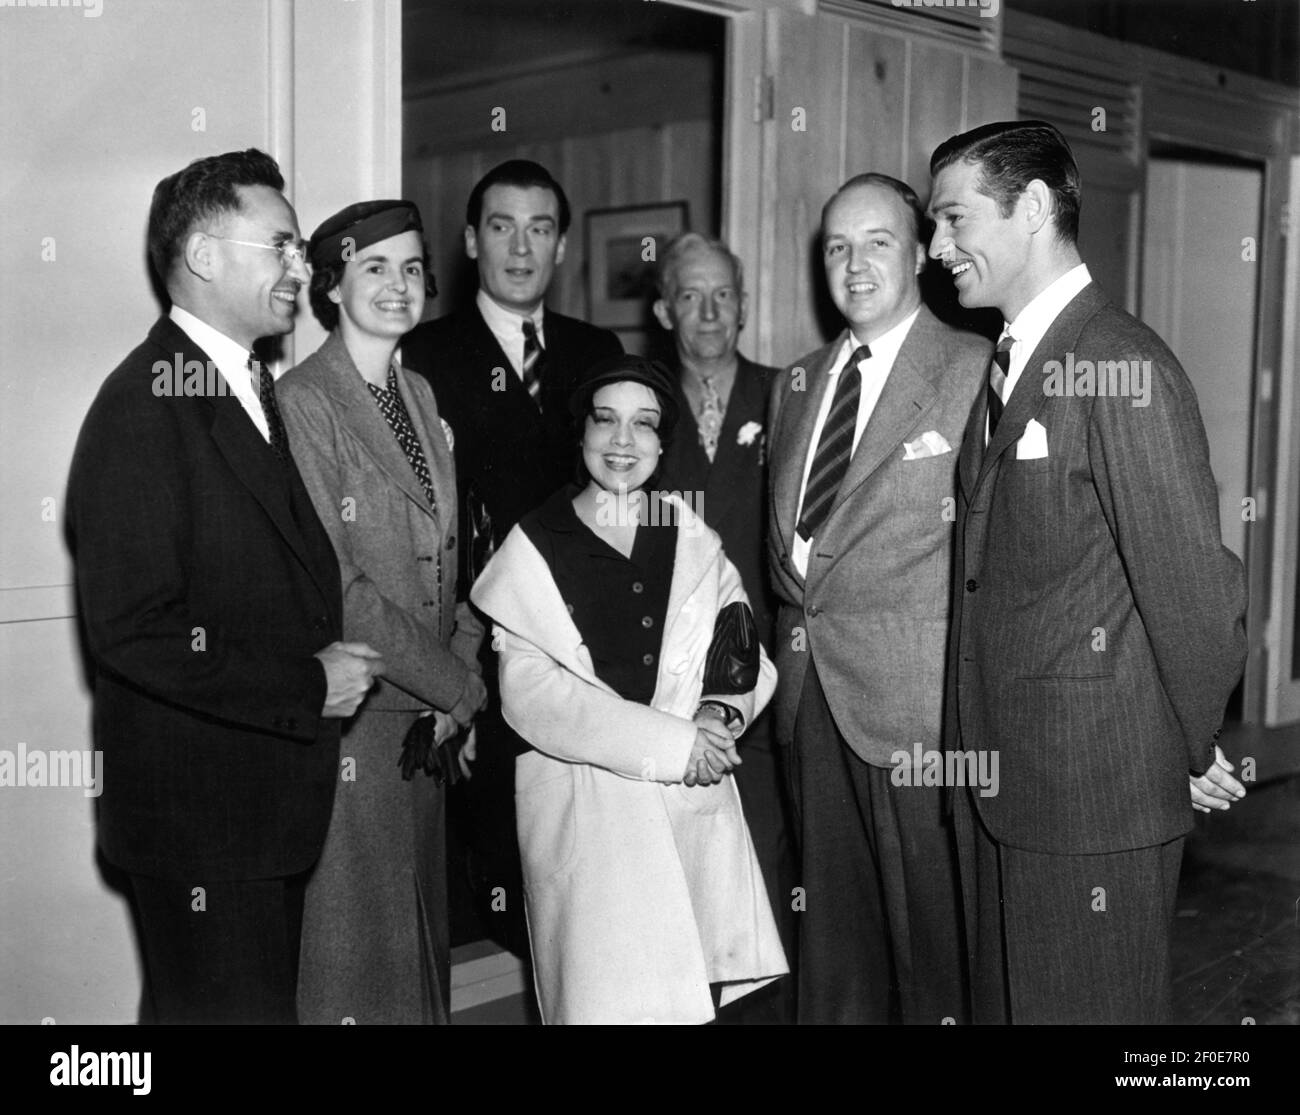 WALTER PIDGEON and CLARK GABLE with Unidentified Studio Set Visitors during filming of TOO HOT TO HANDLE 1938 director JACK CONWAY based on a story by Len Hammond screenplay Laurence Stallings and John Lee Mahin wardrobe Dolly Tree music Franz Waxman producer Lawrence Weingarten Metro Goldwyn Mayer Stock Photo